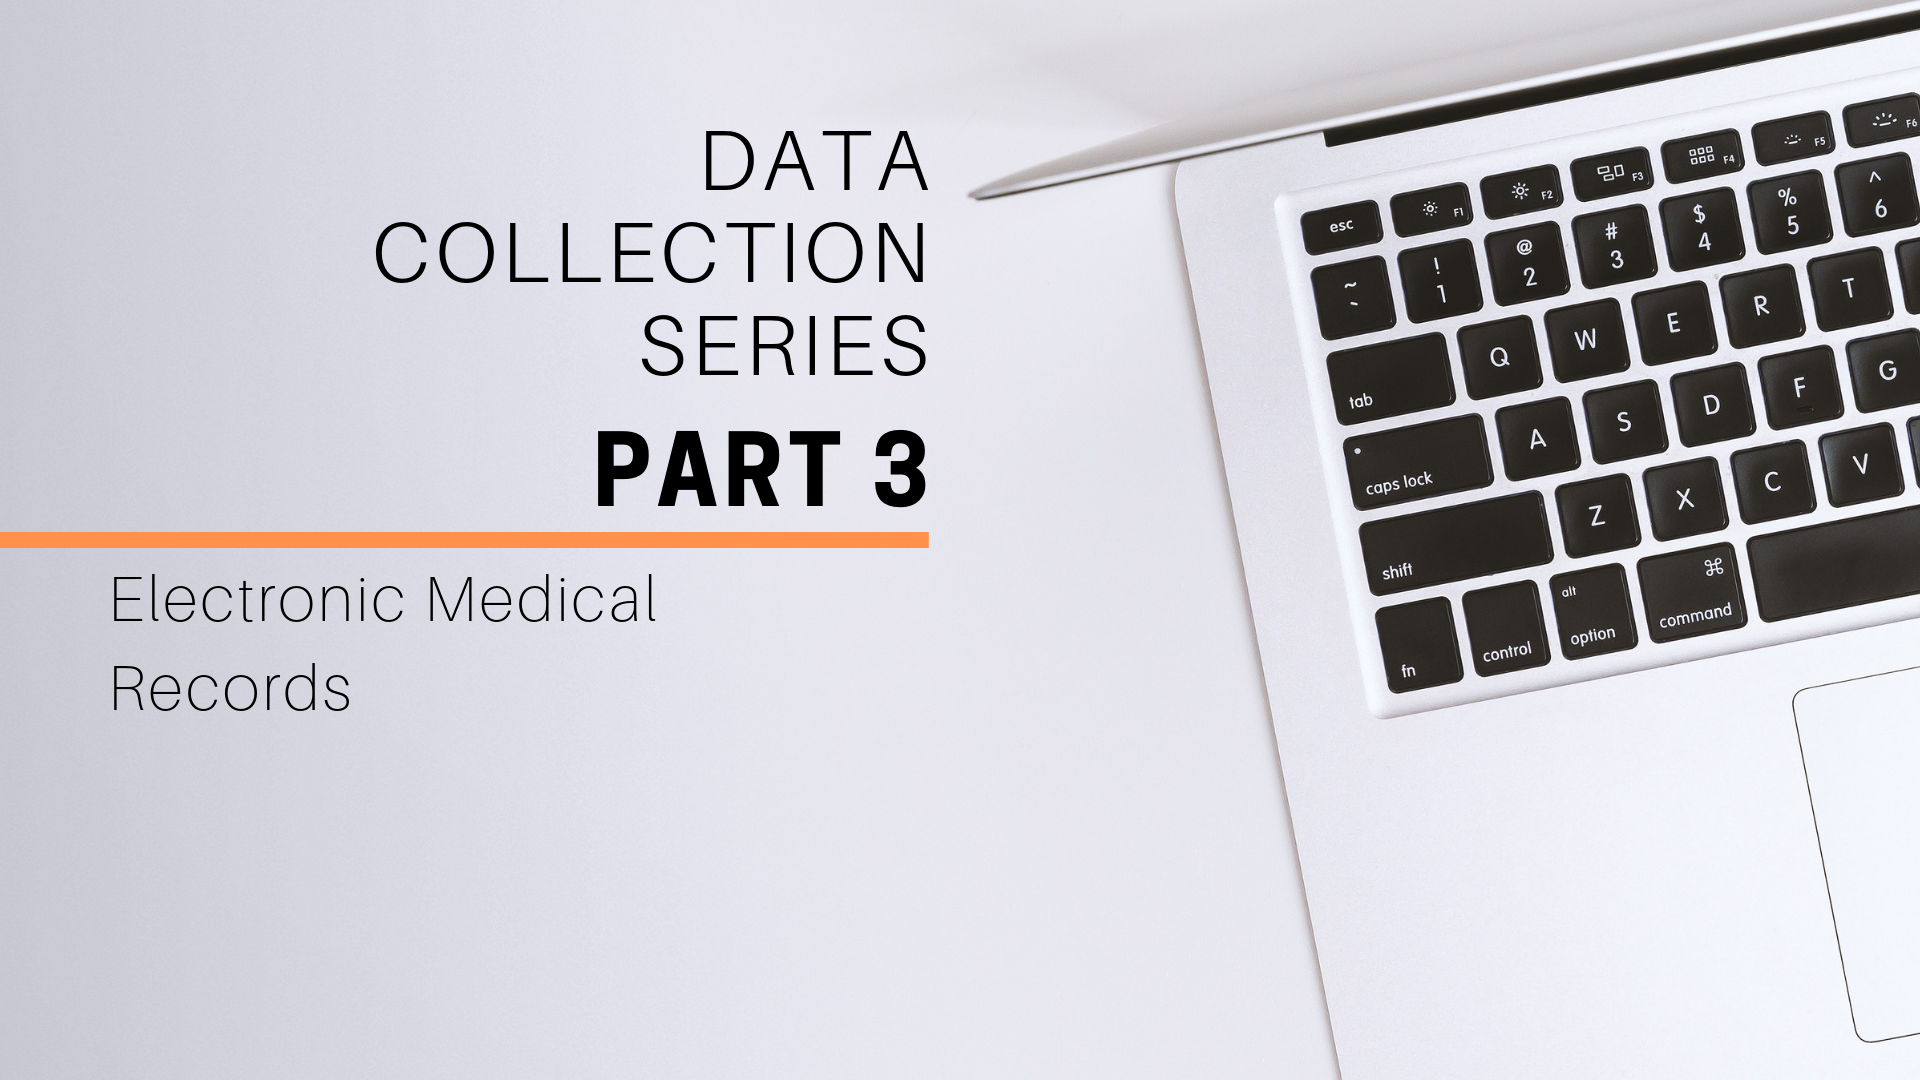 Data Collection Series part 3